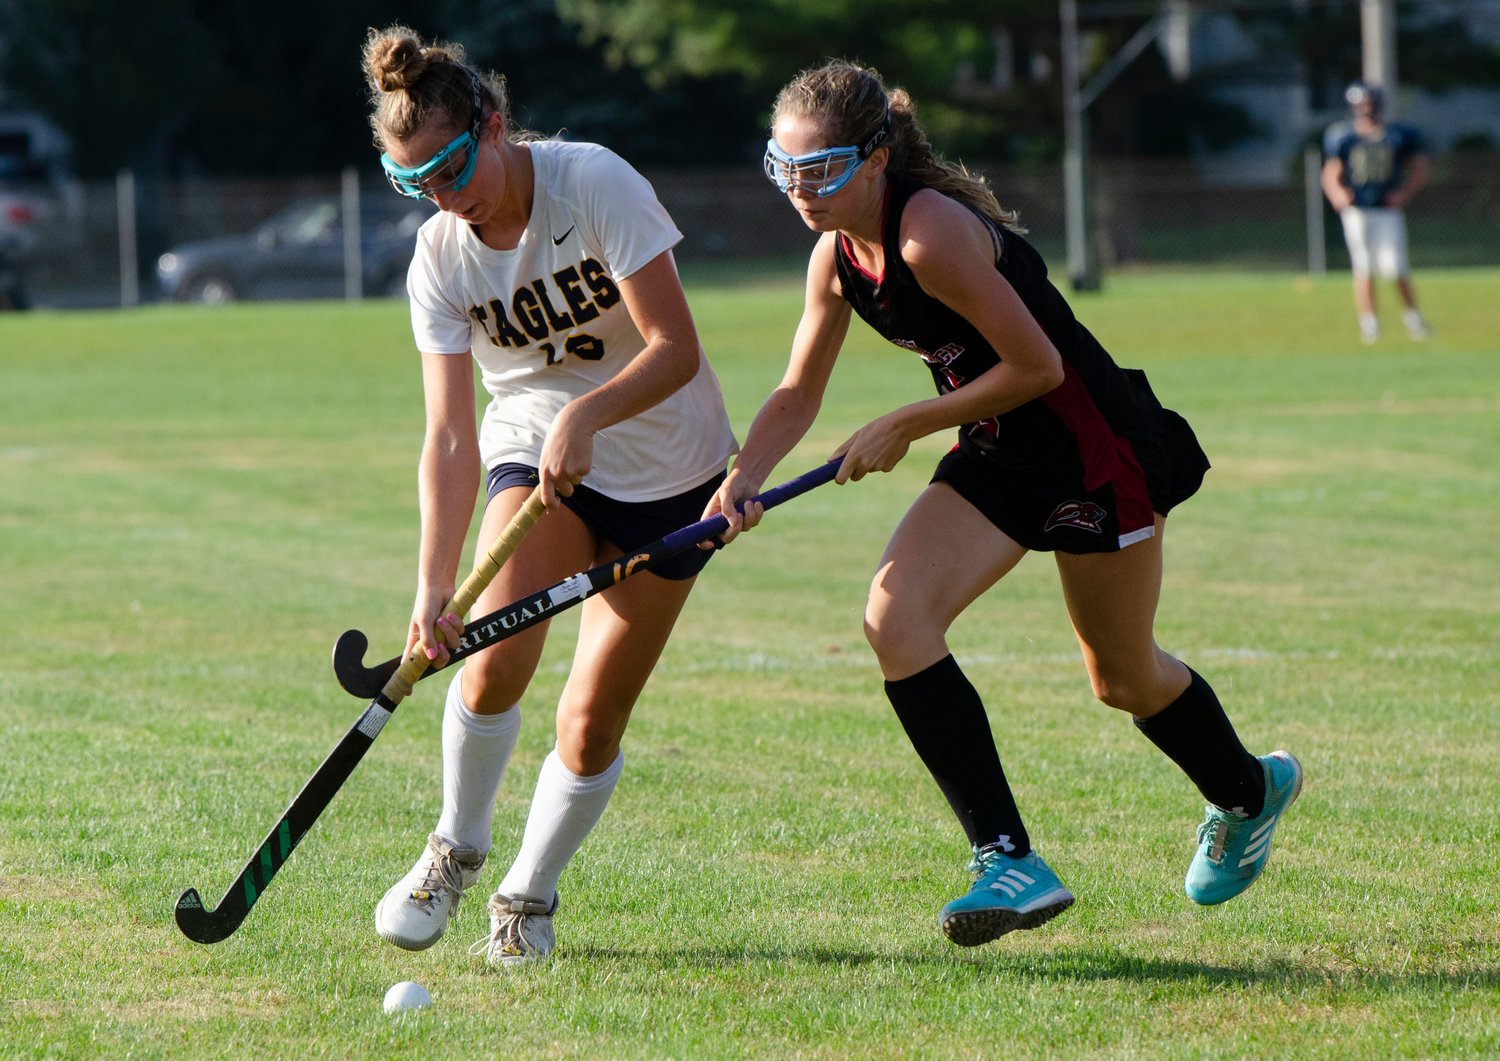 The Barrington High School field hockey team plays its home games on the field that runs along the edge of County Road. A new fields report is proposing eight acres of the BHS athletic fields be covered in artificial turf.